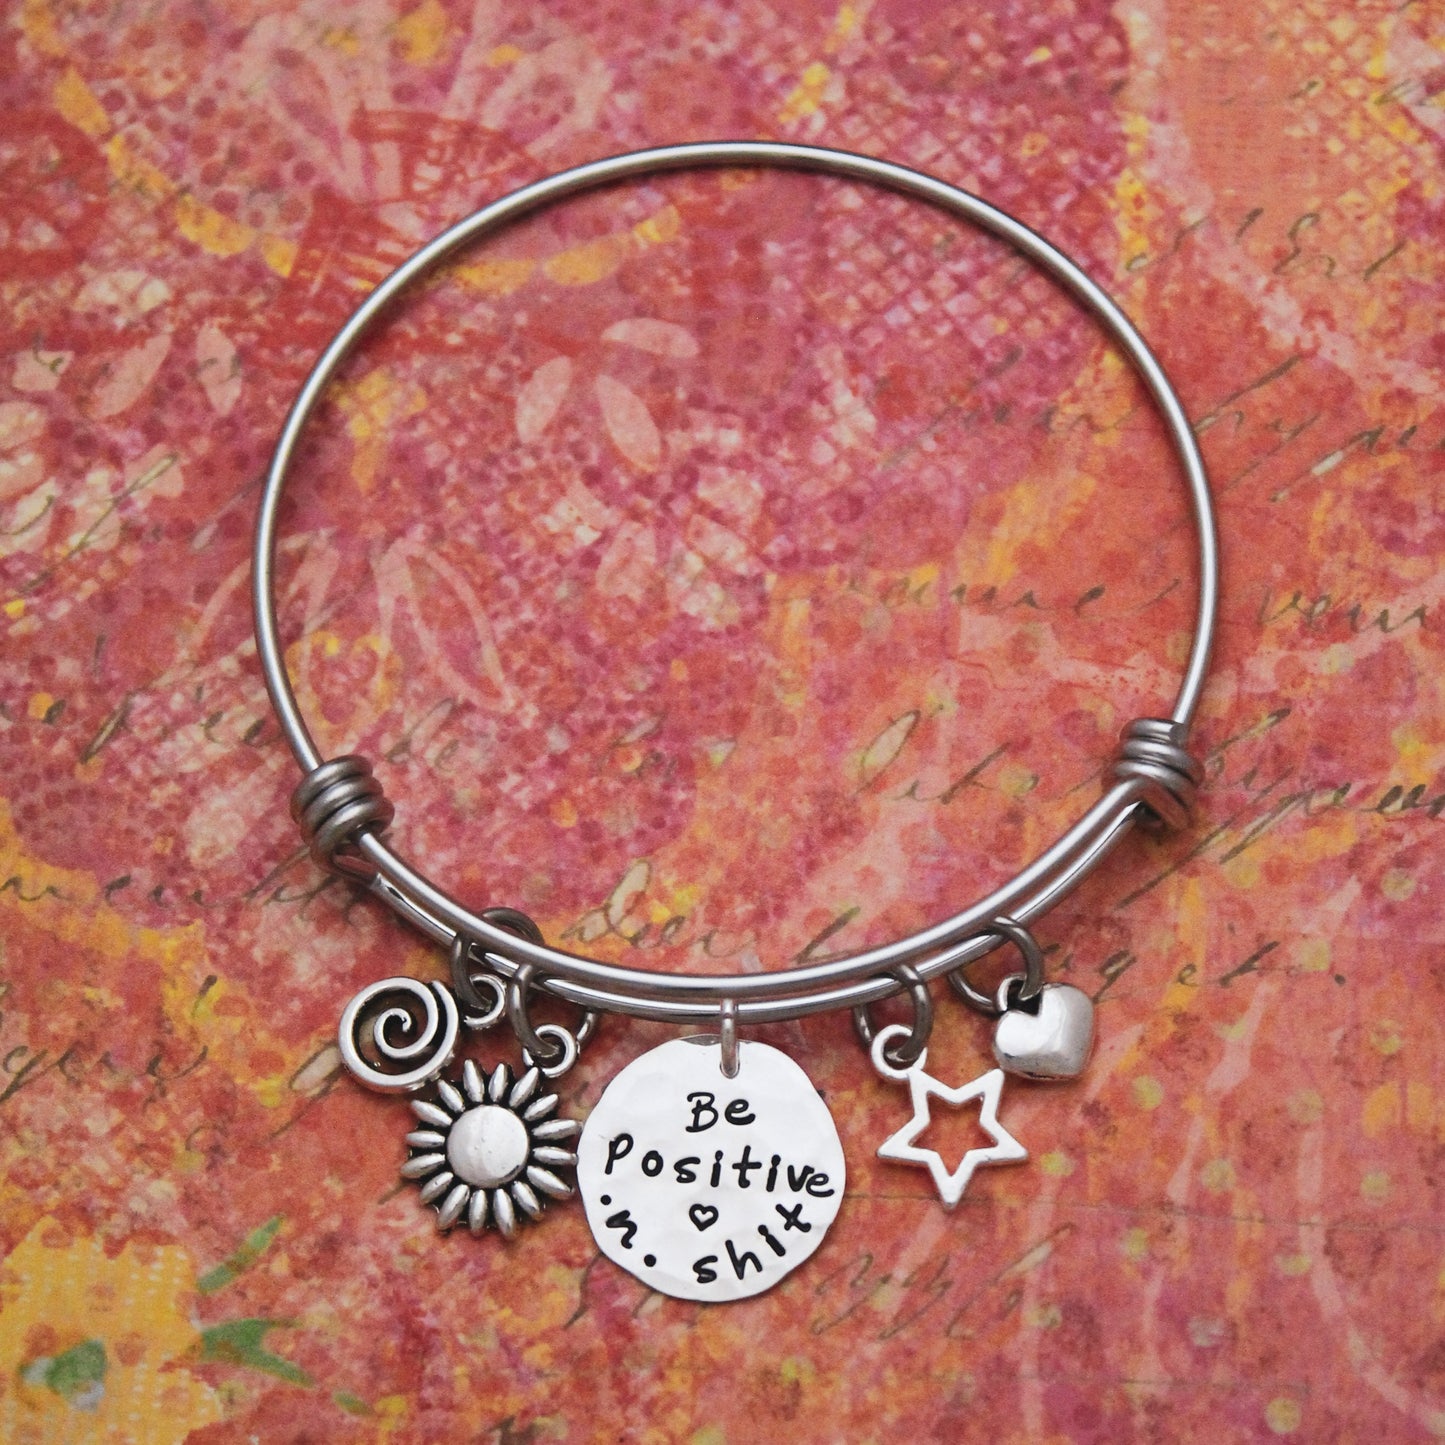 Be Positive n Shit Bracelet Bangle, Motivational Jewelry Bracelet, Curse Word Jewelry Bracelet Gift, Fun Hand Made Personalized Gift for Her